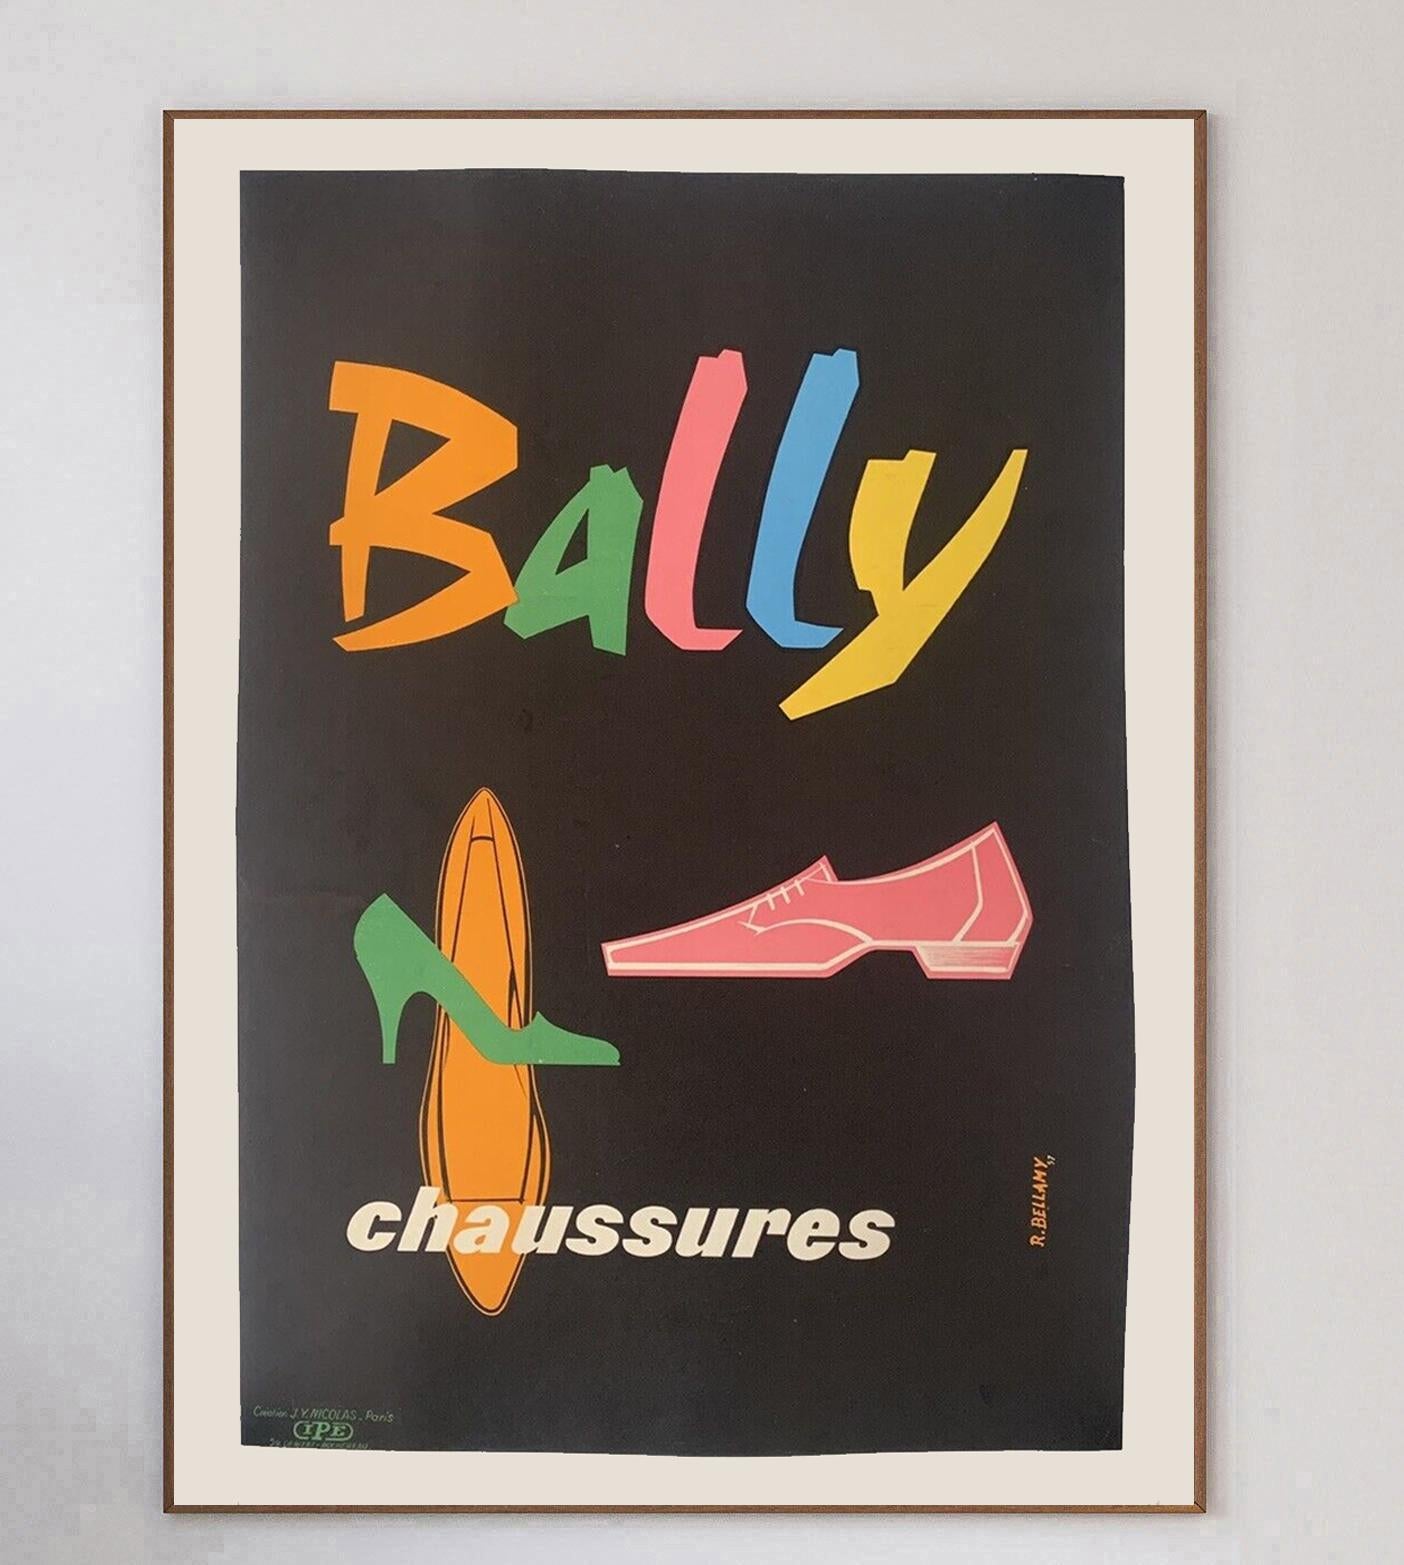 Beautiful mid century design by R. Bellamy for Bally. The luxury Swiss shoemaker famously collaborated with many poster artists in promotion of its brand through the 20th century.

This great 1957 design features several pairs of shoes in different